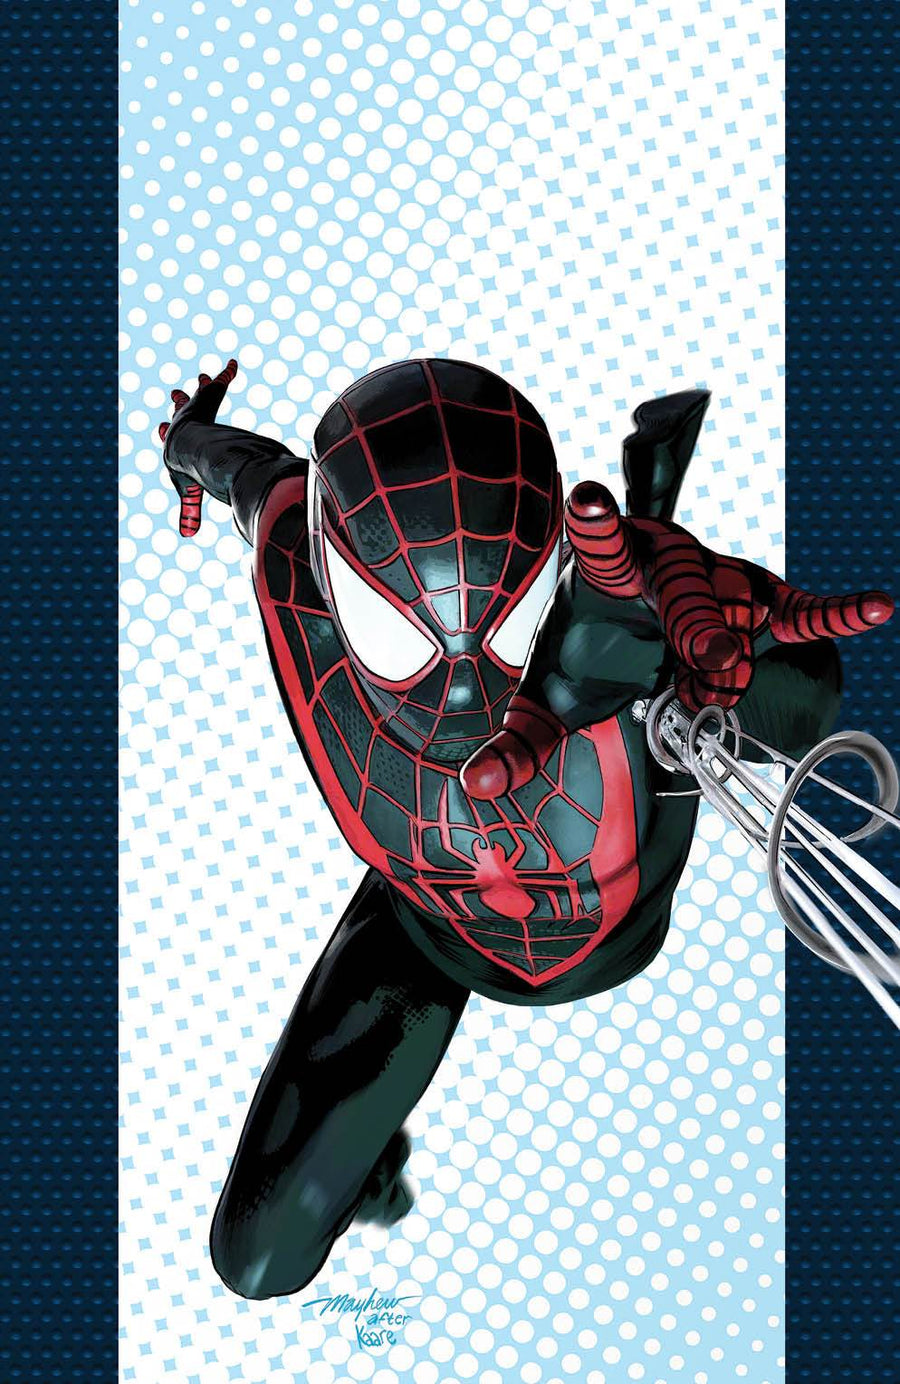 MILES MORALES: SPIDER-MAN #25 KRS COMICS Variant Cover Set with Trade Dress and Virgin Raw